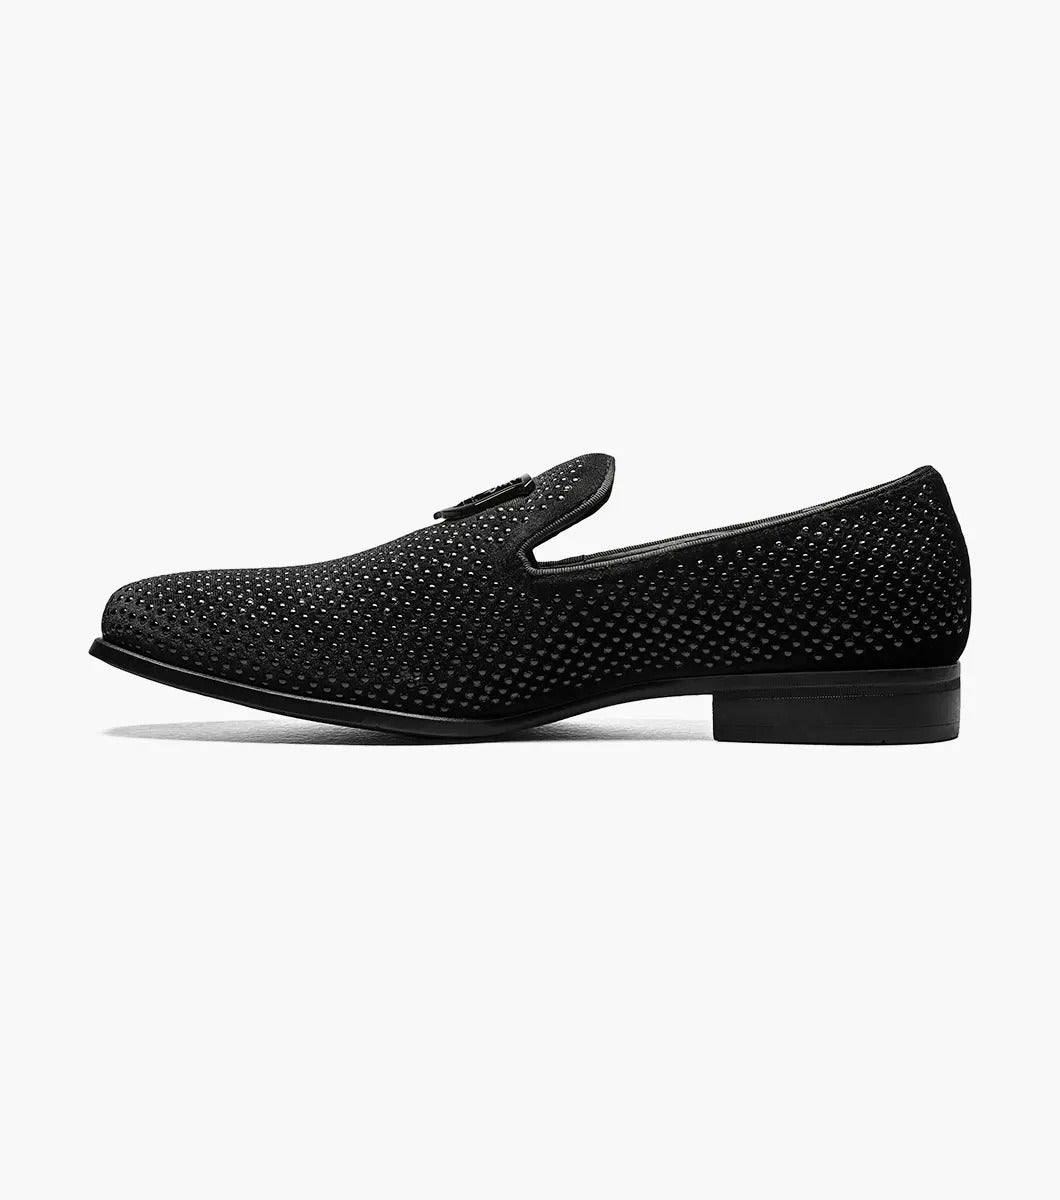 Stacy Adams - SWAGGER Studded Slip On - Black - 25228-001